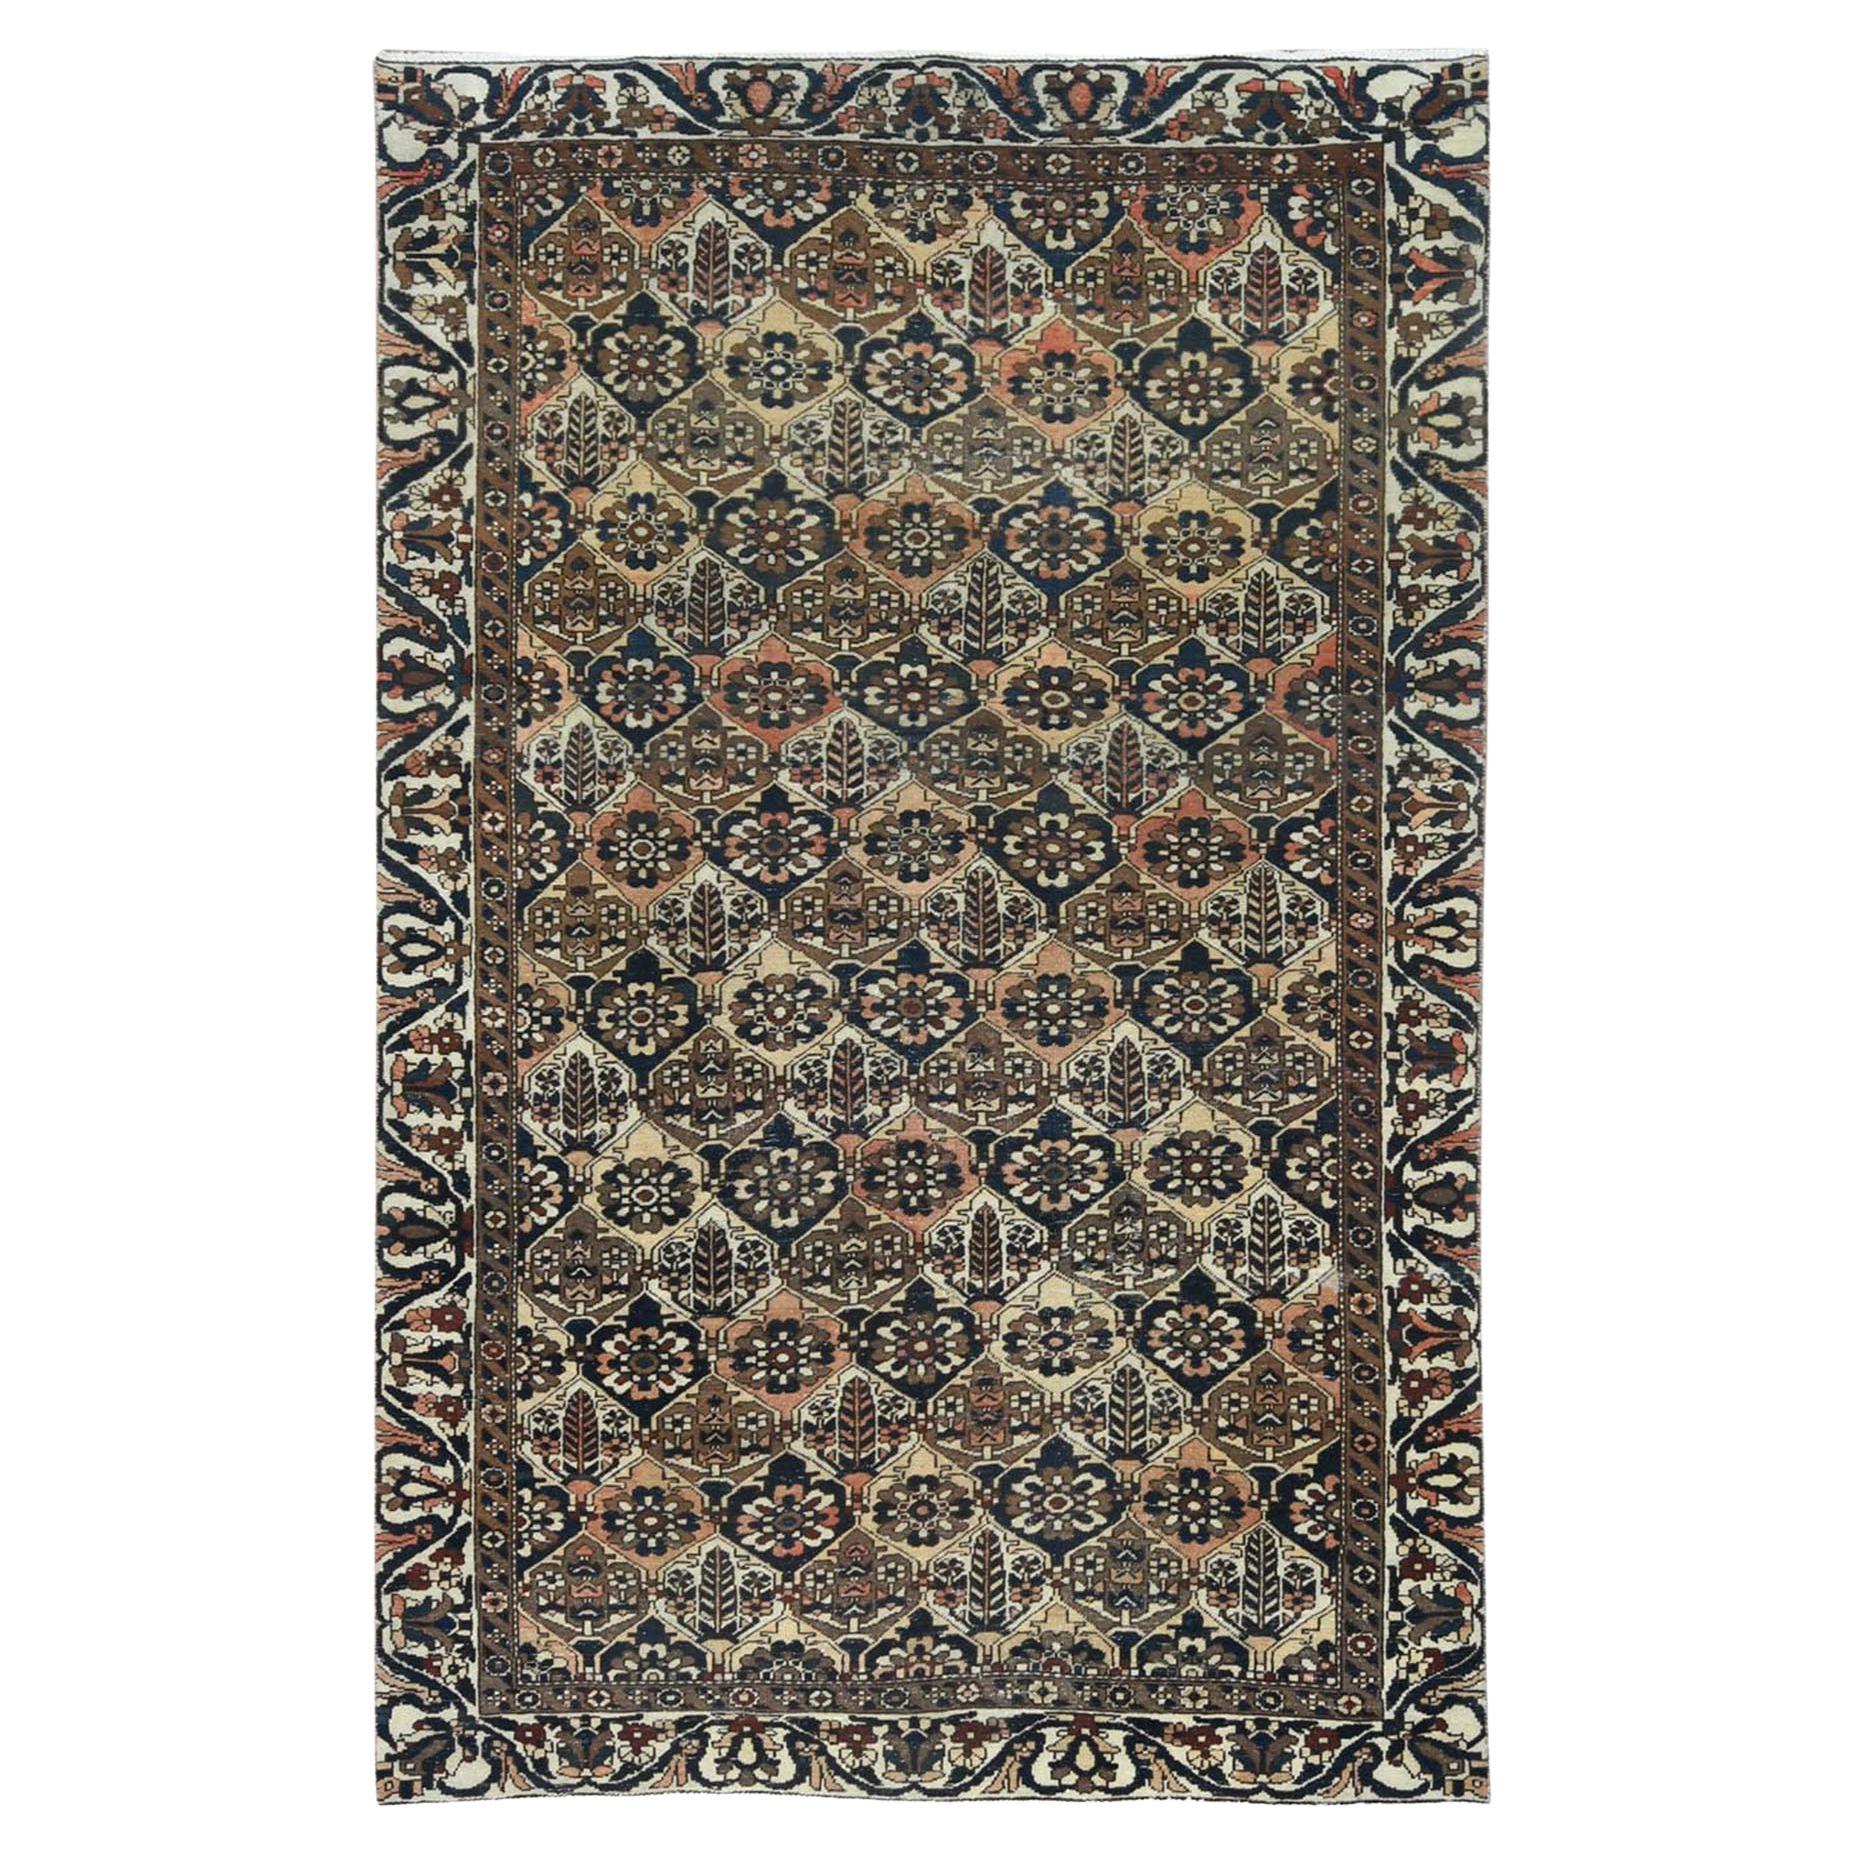 Colorful, Hand Knotted Vintage Persian Bakhtiar, Distressed Look Worn Wool Rug